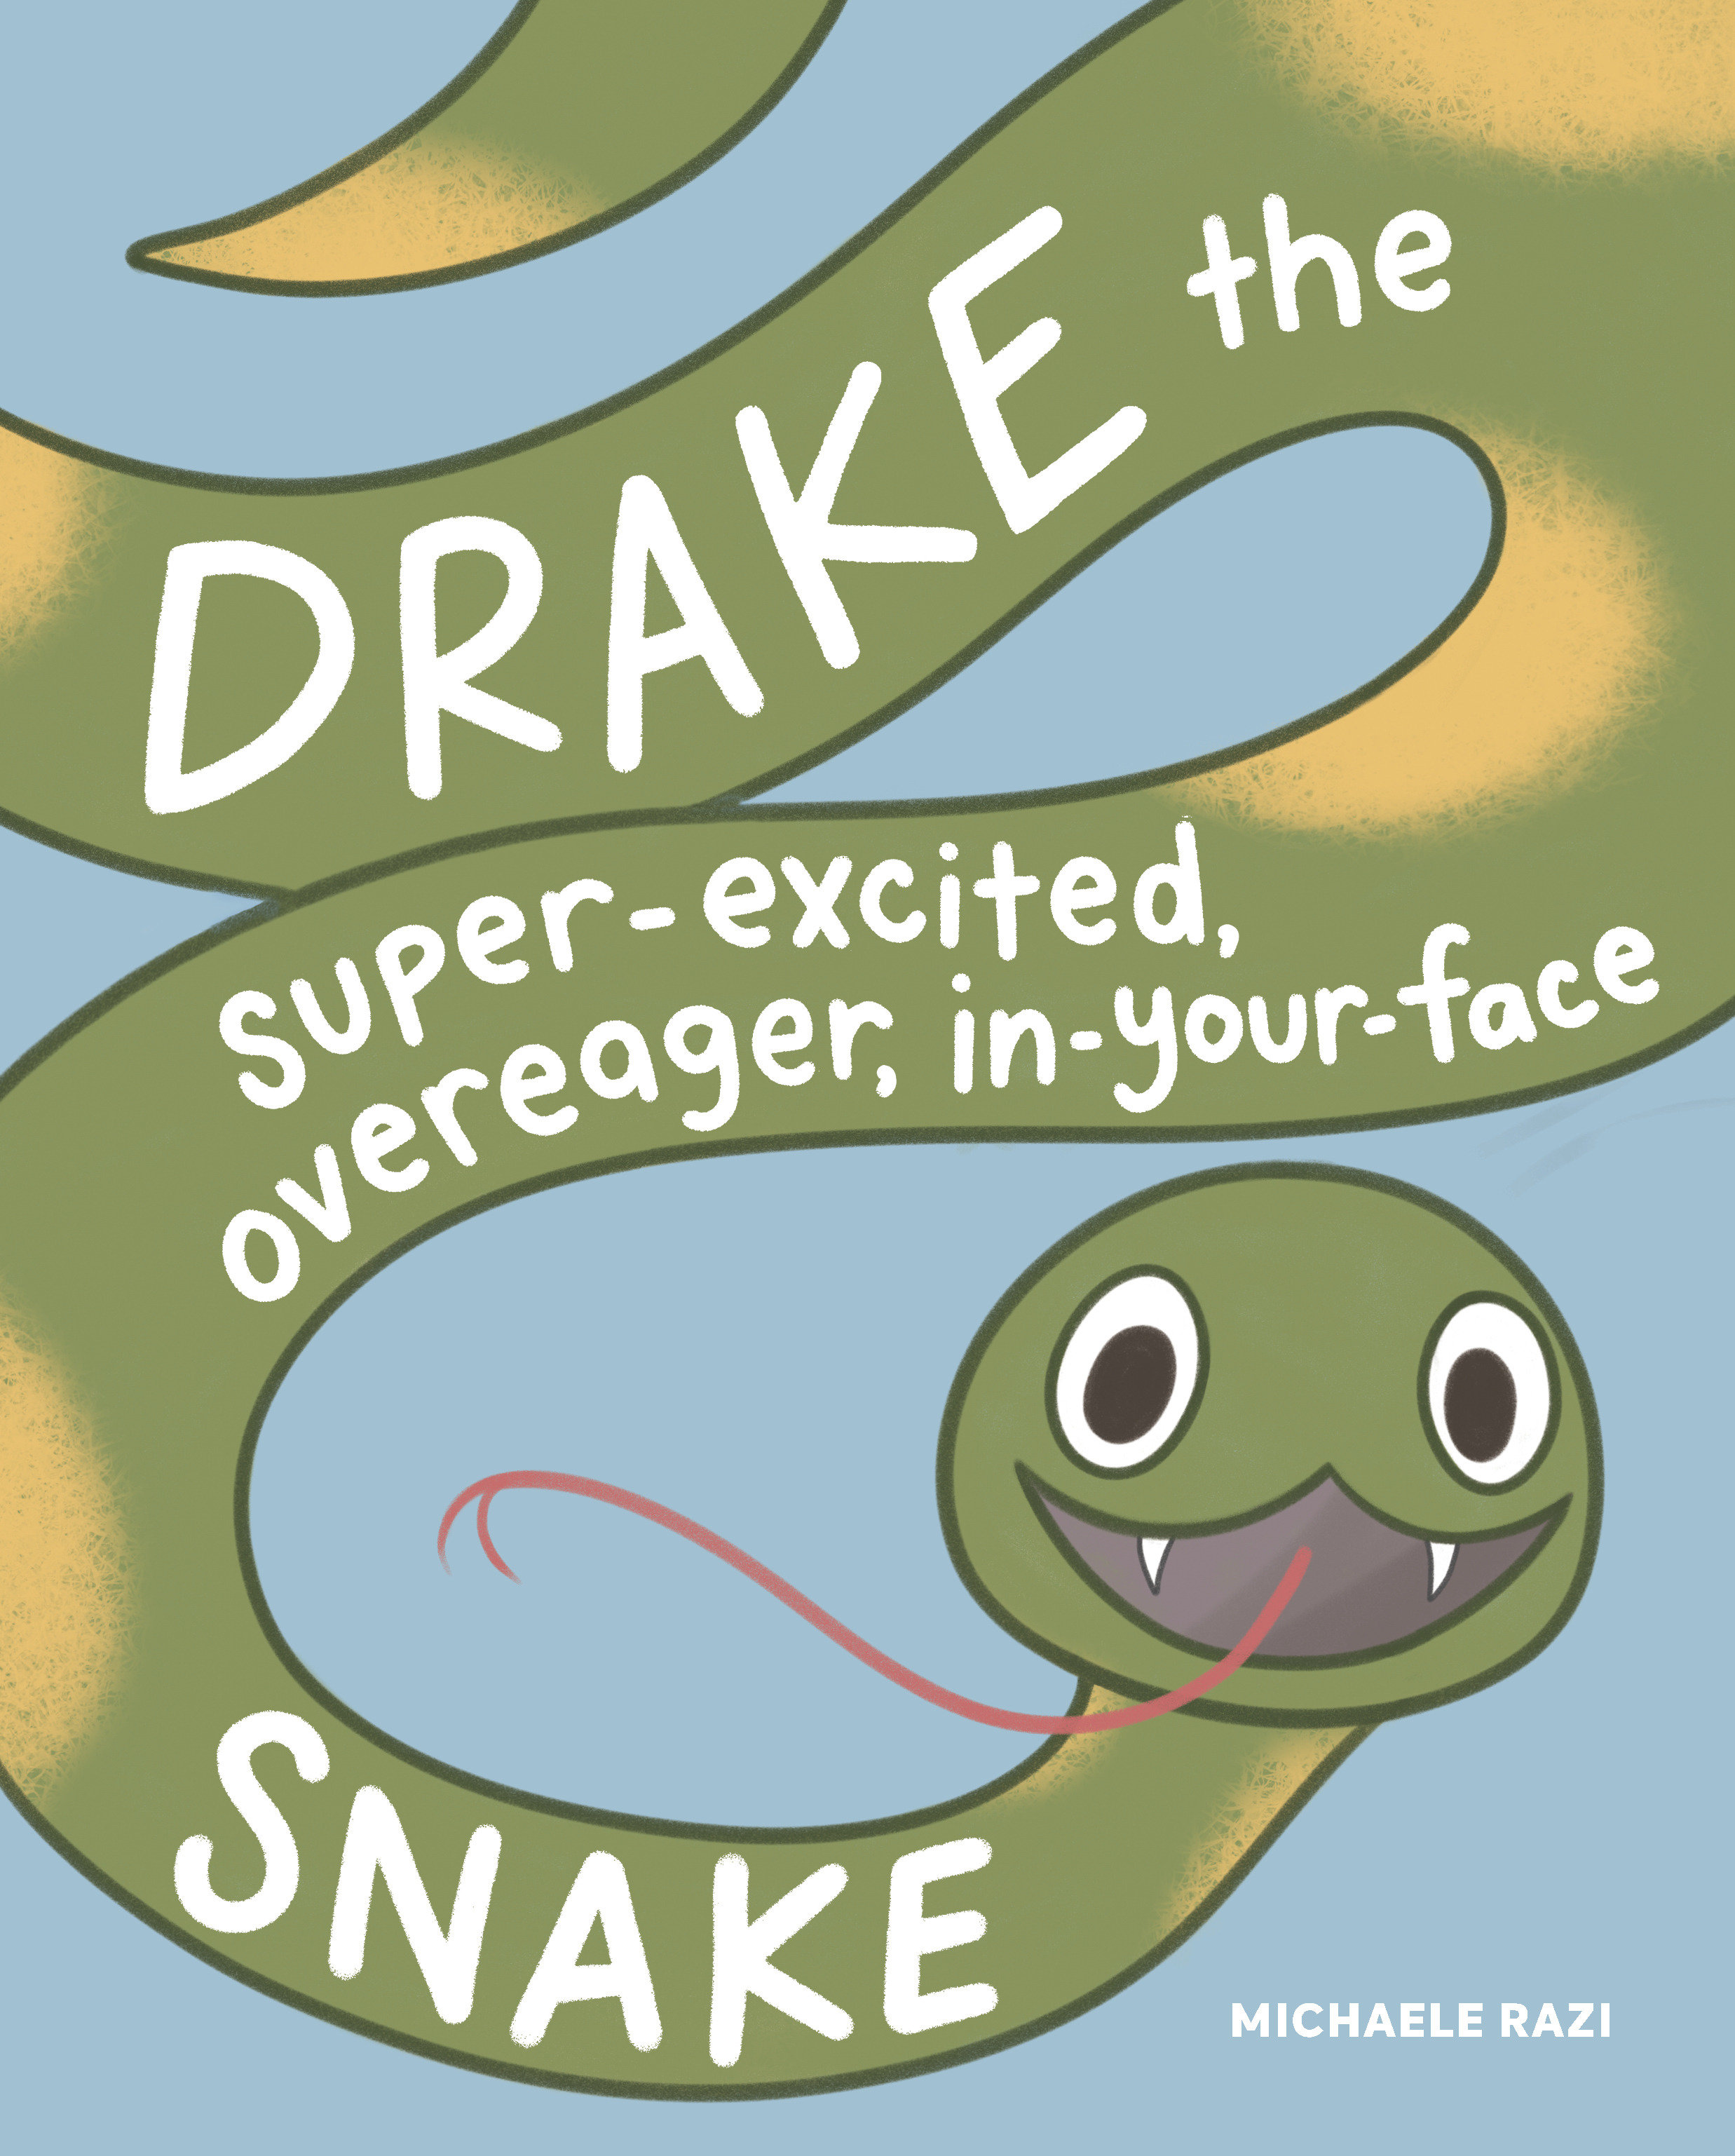 Drake The Super-Excited, Overeager, In-Your-Face Snake (Hardcover Book)